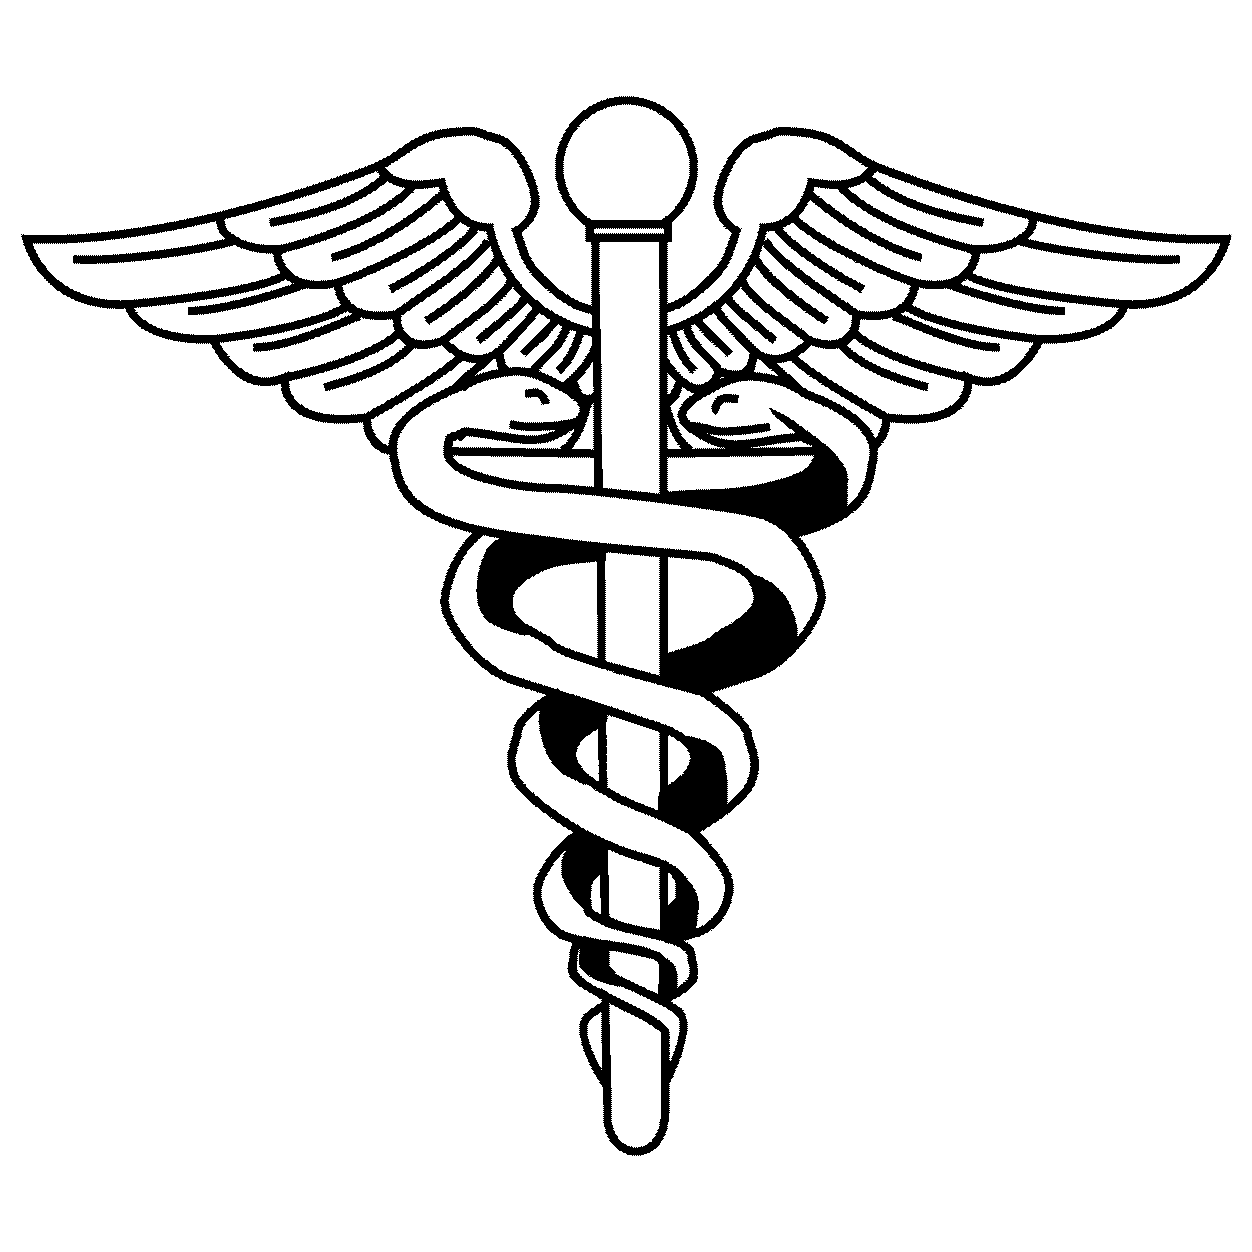 Caduceus Drawing | Free download on ClipArtMag